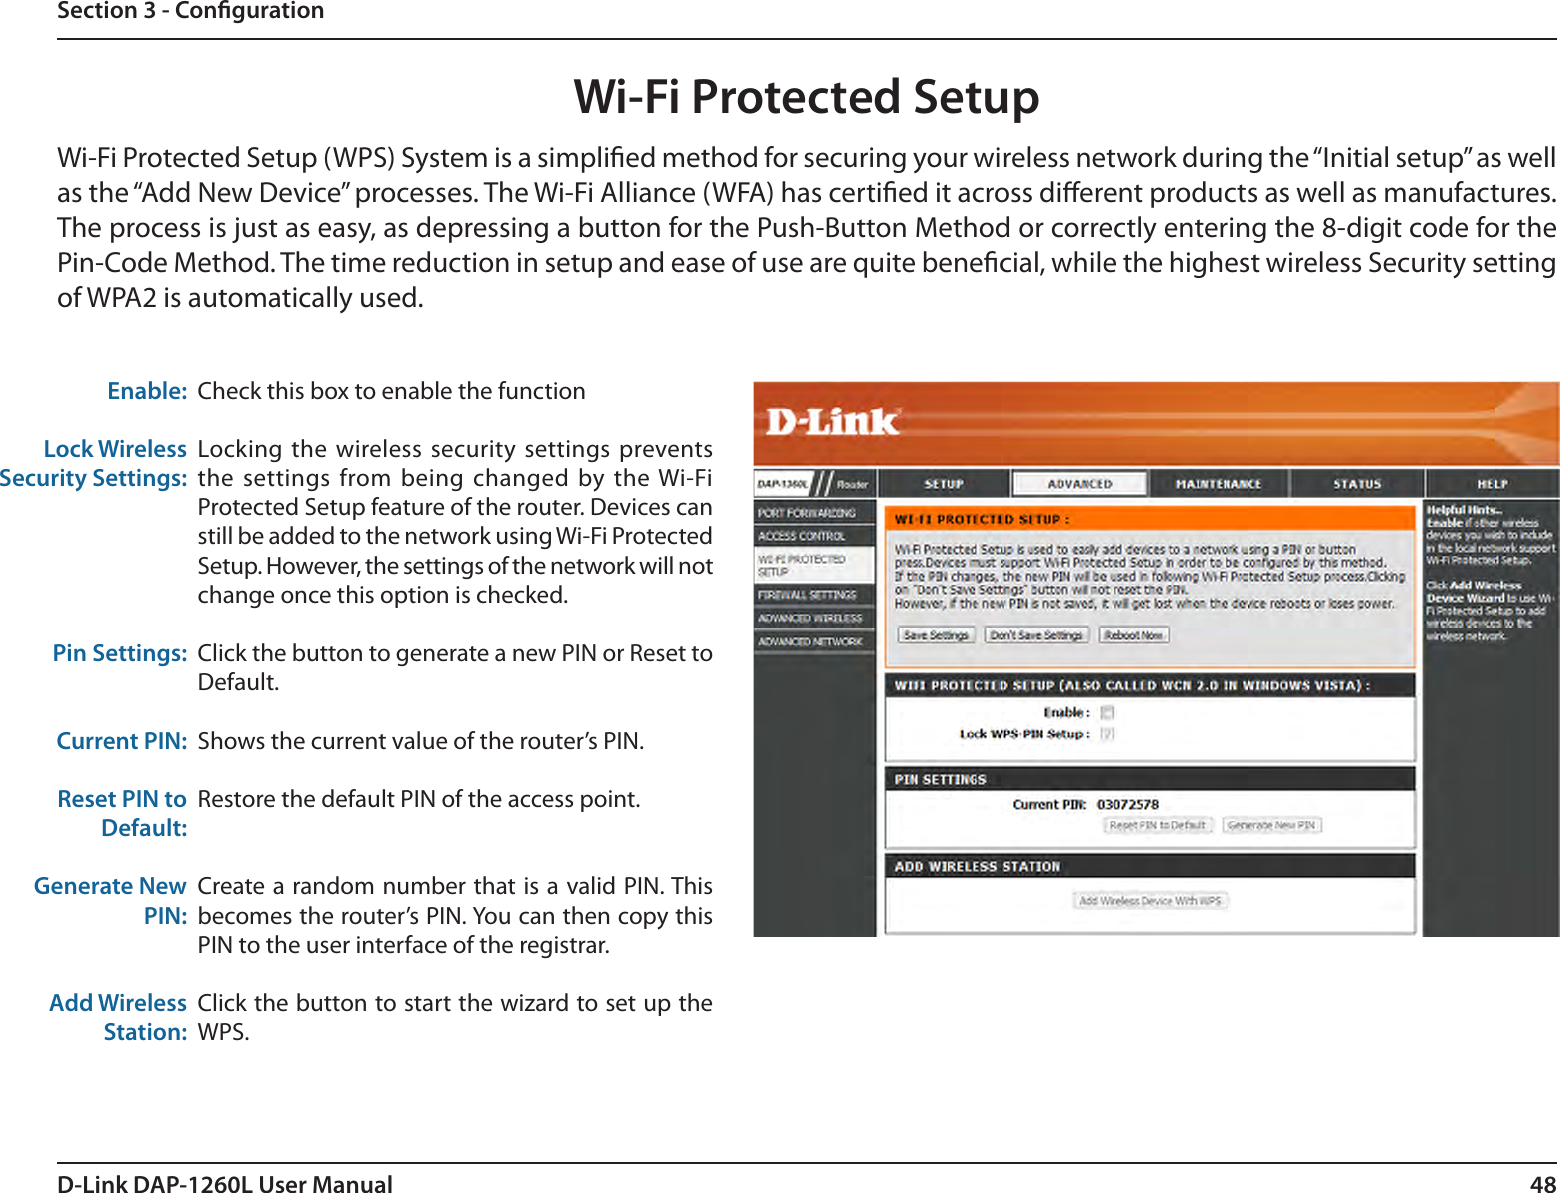 48D-Link DAP-1260L User ManualSection 3 - CongurationWi-Fi Protected SetupCheck this box to enable the functionLocking the  wireless security settings prevents the settings  from being changed  by the Wi-Fi Protected Setup feature of the router. Devices can still be added to the network using Wi-Fi Protected Setup. However, the settings of the network will not change once this option is checked.Click the button to generate a new PIN or Reset to Default. Shows the current value of the router’s PIN.Restore the default PIN of the access point.Create a random number that is a valid PIN. This becomes the router’s PIN. You can then copy this PIN to the user interface of the registrar.Click the button to start the wizard to set up the WPS. Enable:Lock Wireless Security Settings:Pin Settings:Current PIN:Reset PIN to Default:Generate New PIN:Add Wireless Station:Wi-Fi Protected Setup (WPS) System is a simplied method for securing your wireless network during the “Initial setup” as well as the “Add New Device” processes. The Wi-Fi Alliance (WFA) has certied it across dierent products as well as manufactures. The process is just as easy, as depressing a button for the Push-Button Method or correctly entering the 8-digit code for the Pin-Code Method. The time reduction in setup and ease of use are quite benecial, while the highest wireless Security setting of WPA2 is automatically used.